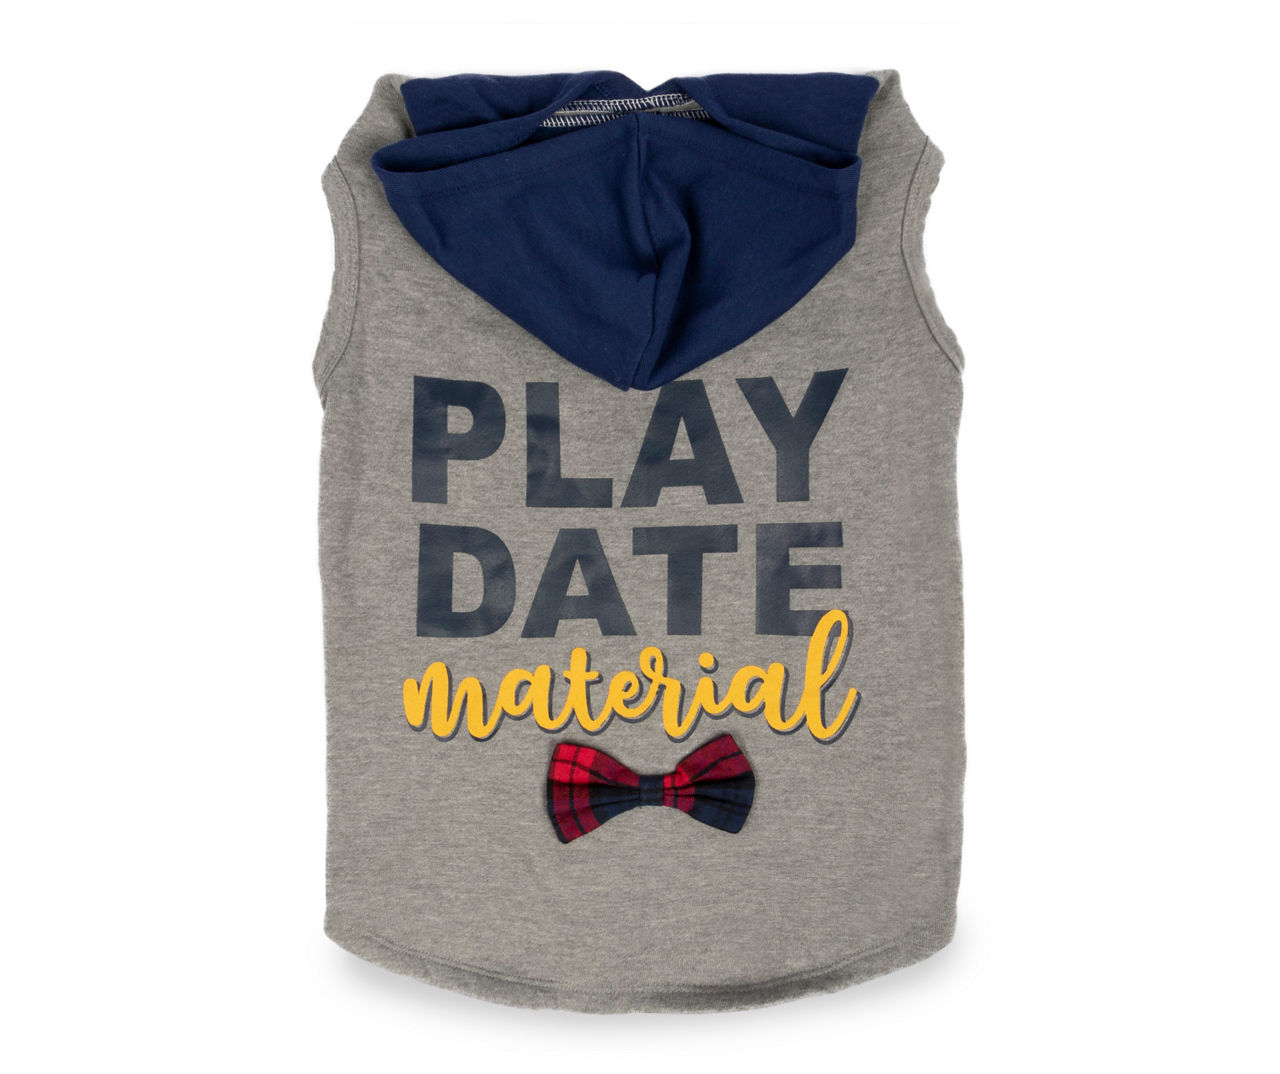 "Play Date Material" Pet Large Gray & Blue Hoodie With Plaid Bowtie